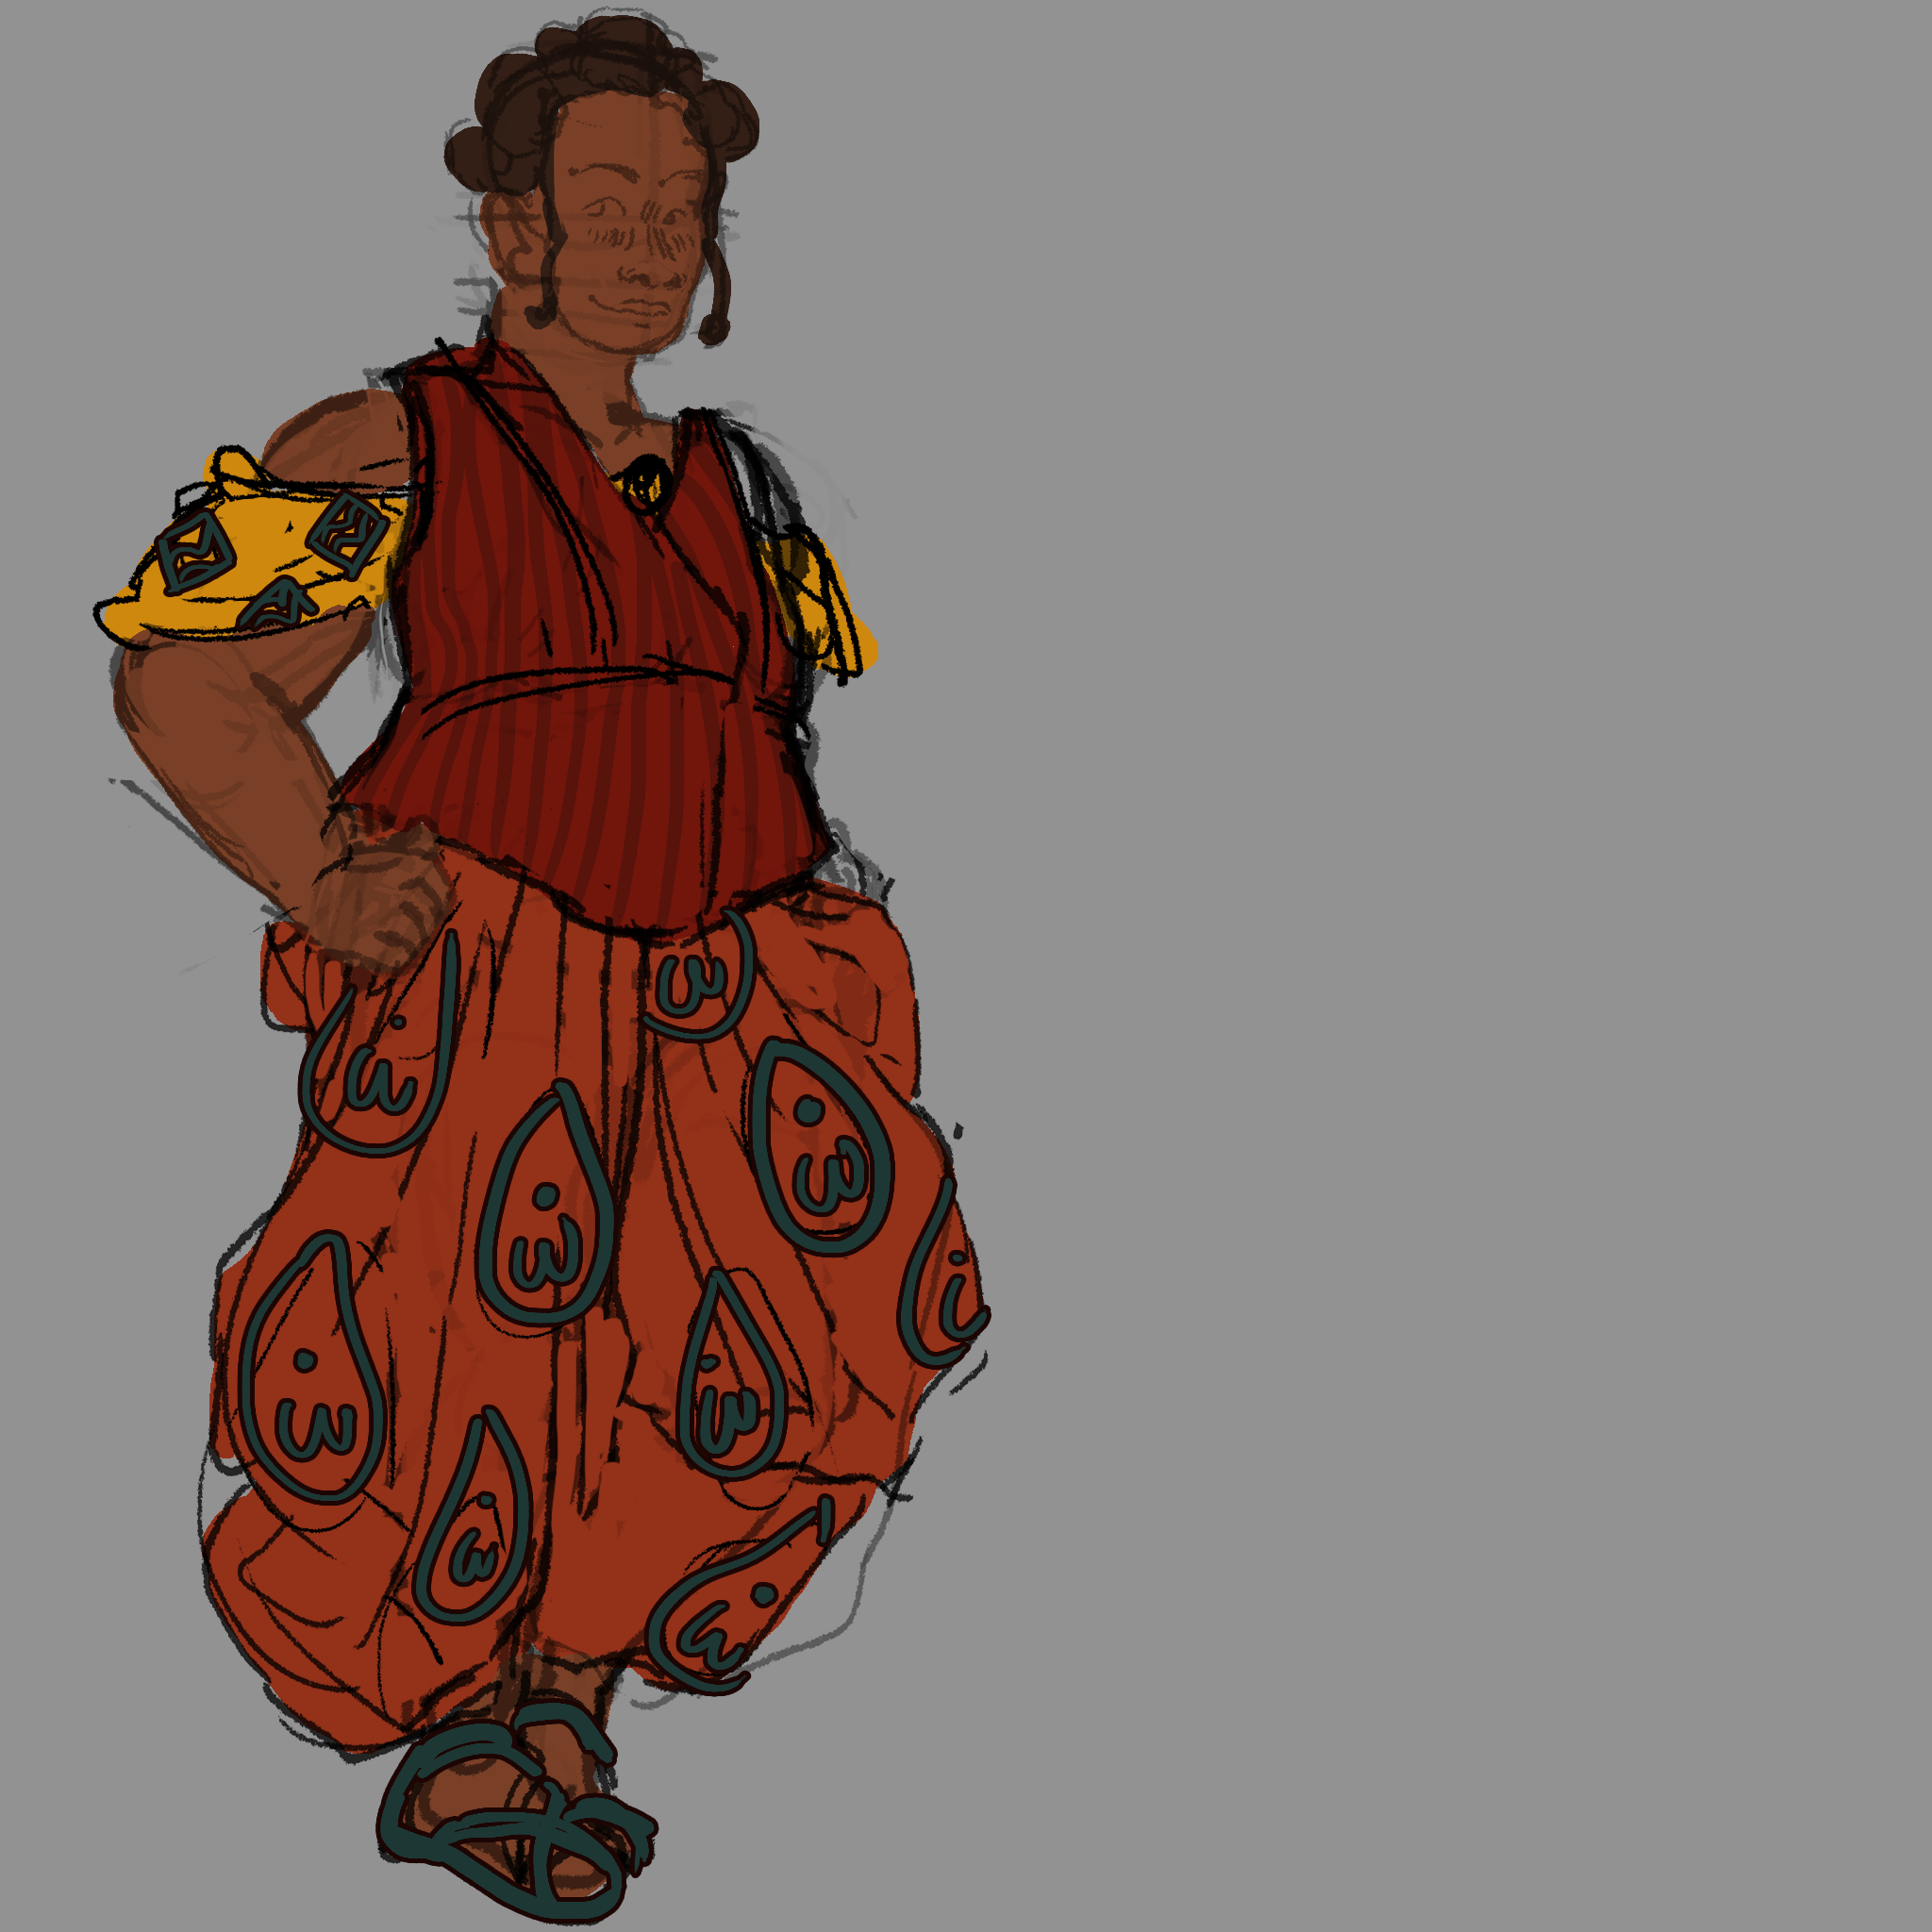 A full-body coloured sketch of Kimbuala, a young Black person wearing orange baggy trousers and yellow sleeves with wax print patterns on and a red waistcoat.